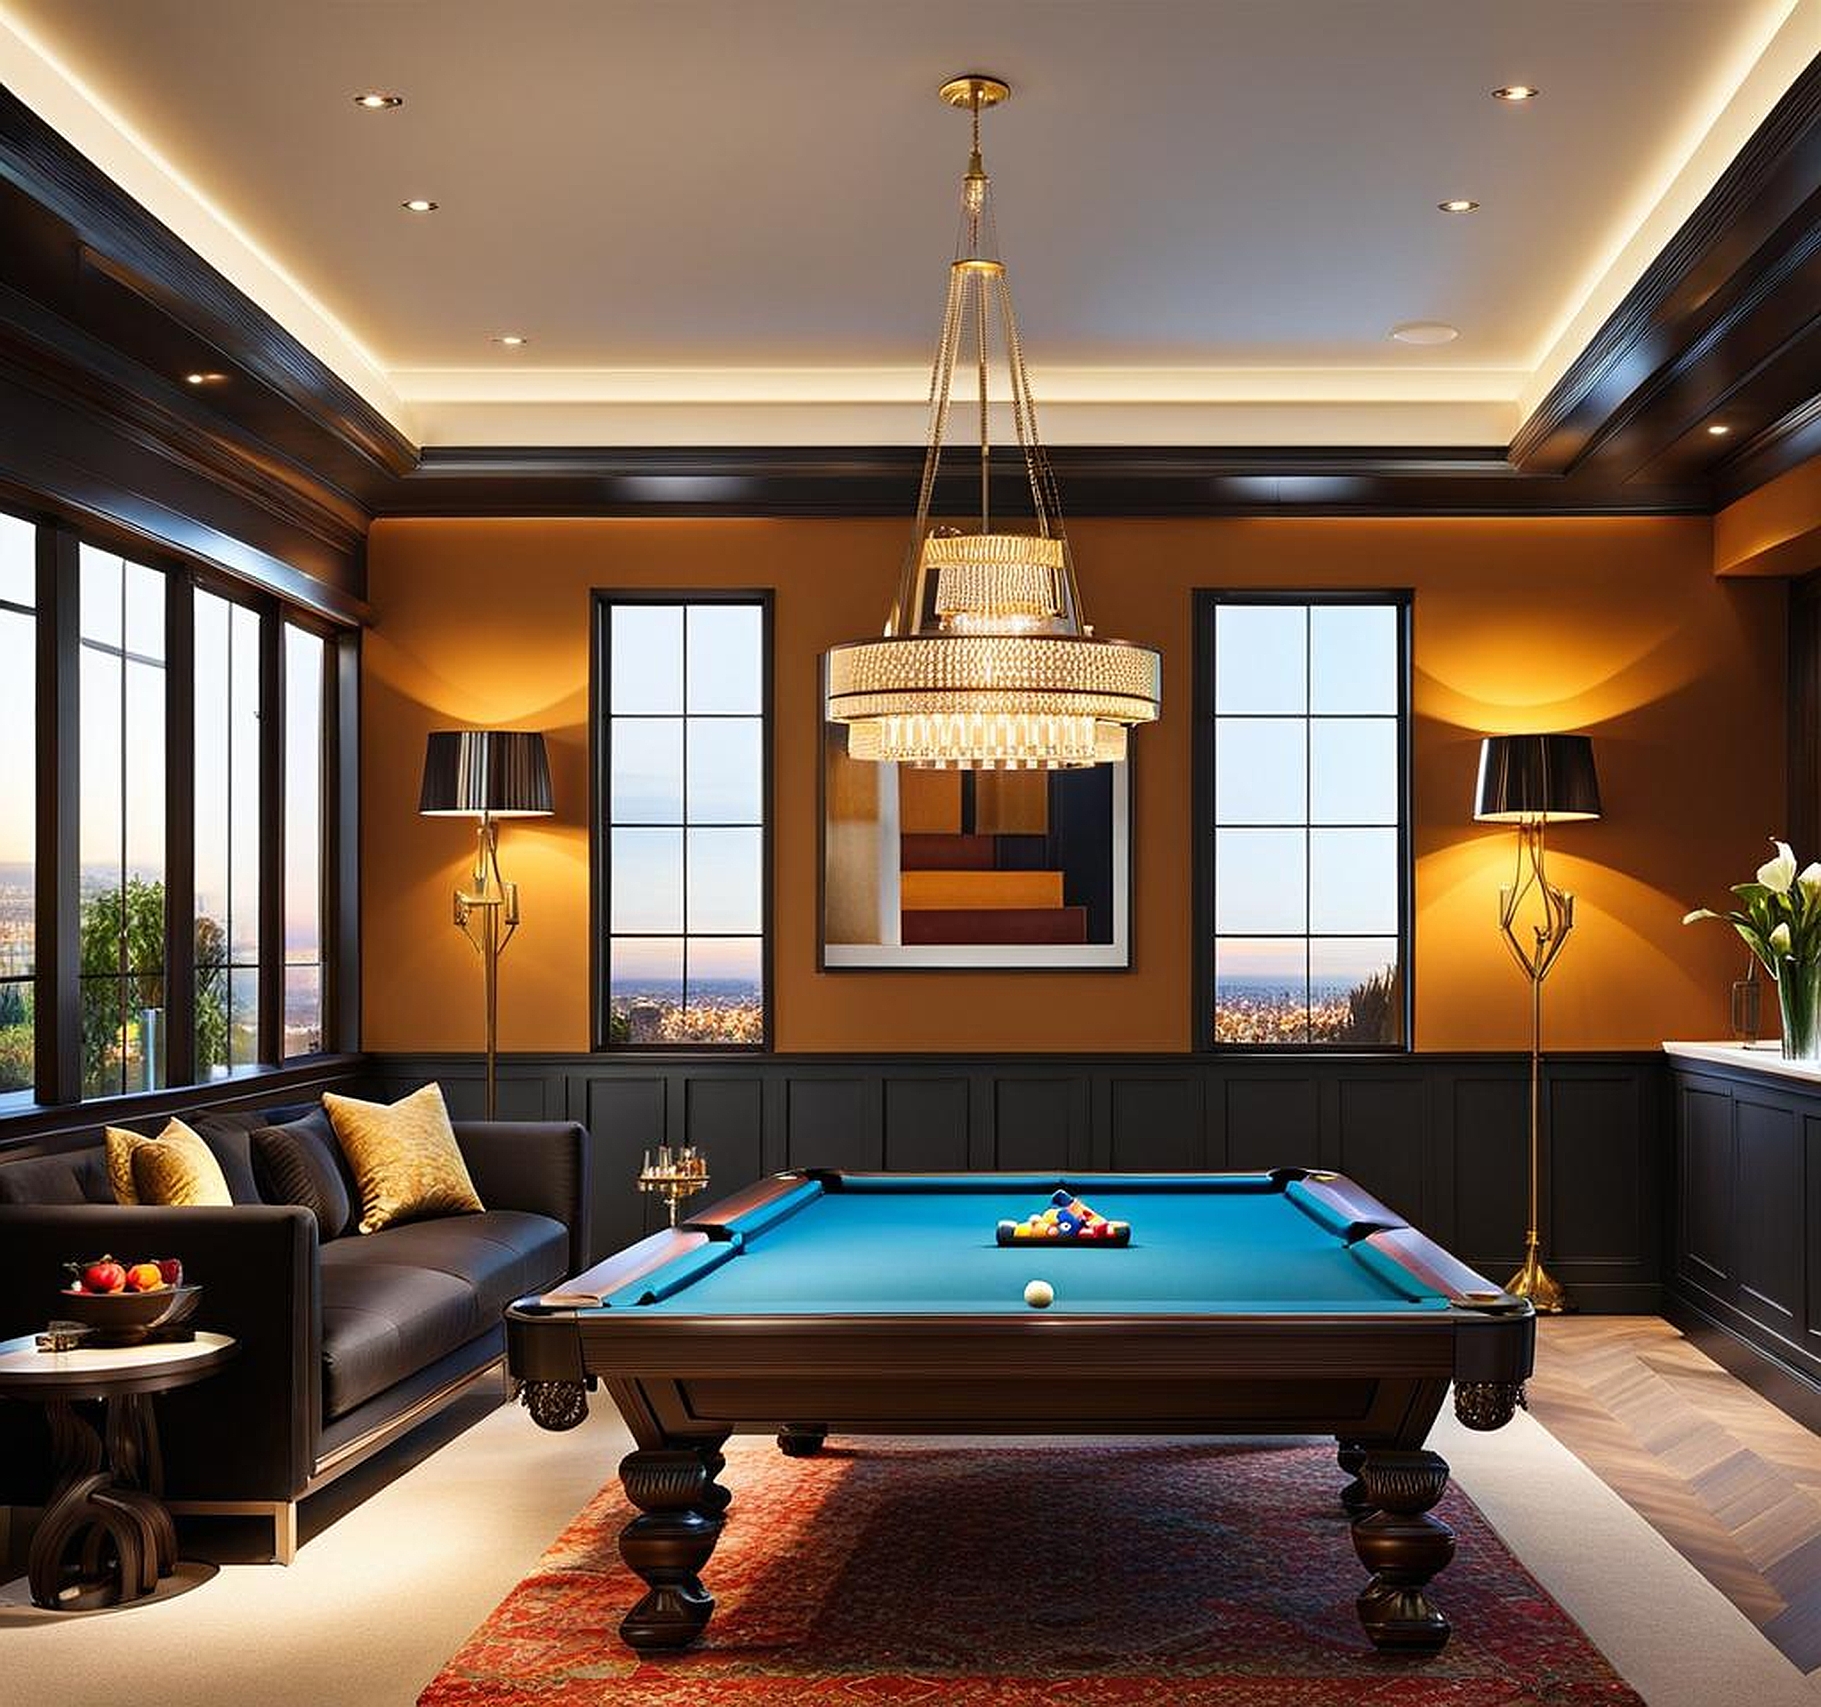 Modern Pool Table Rooms Ideas for a Fun and Sophisticated Home